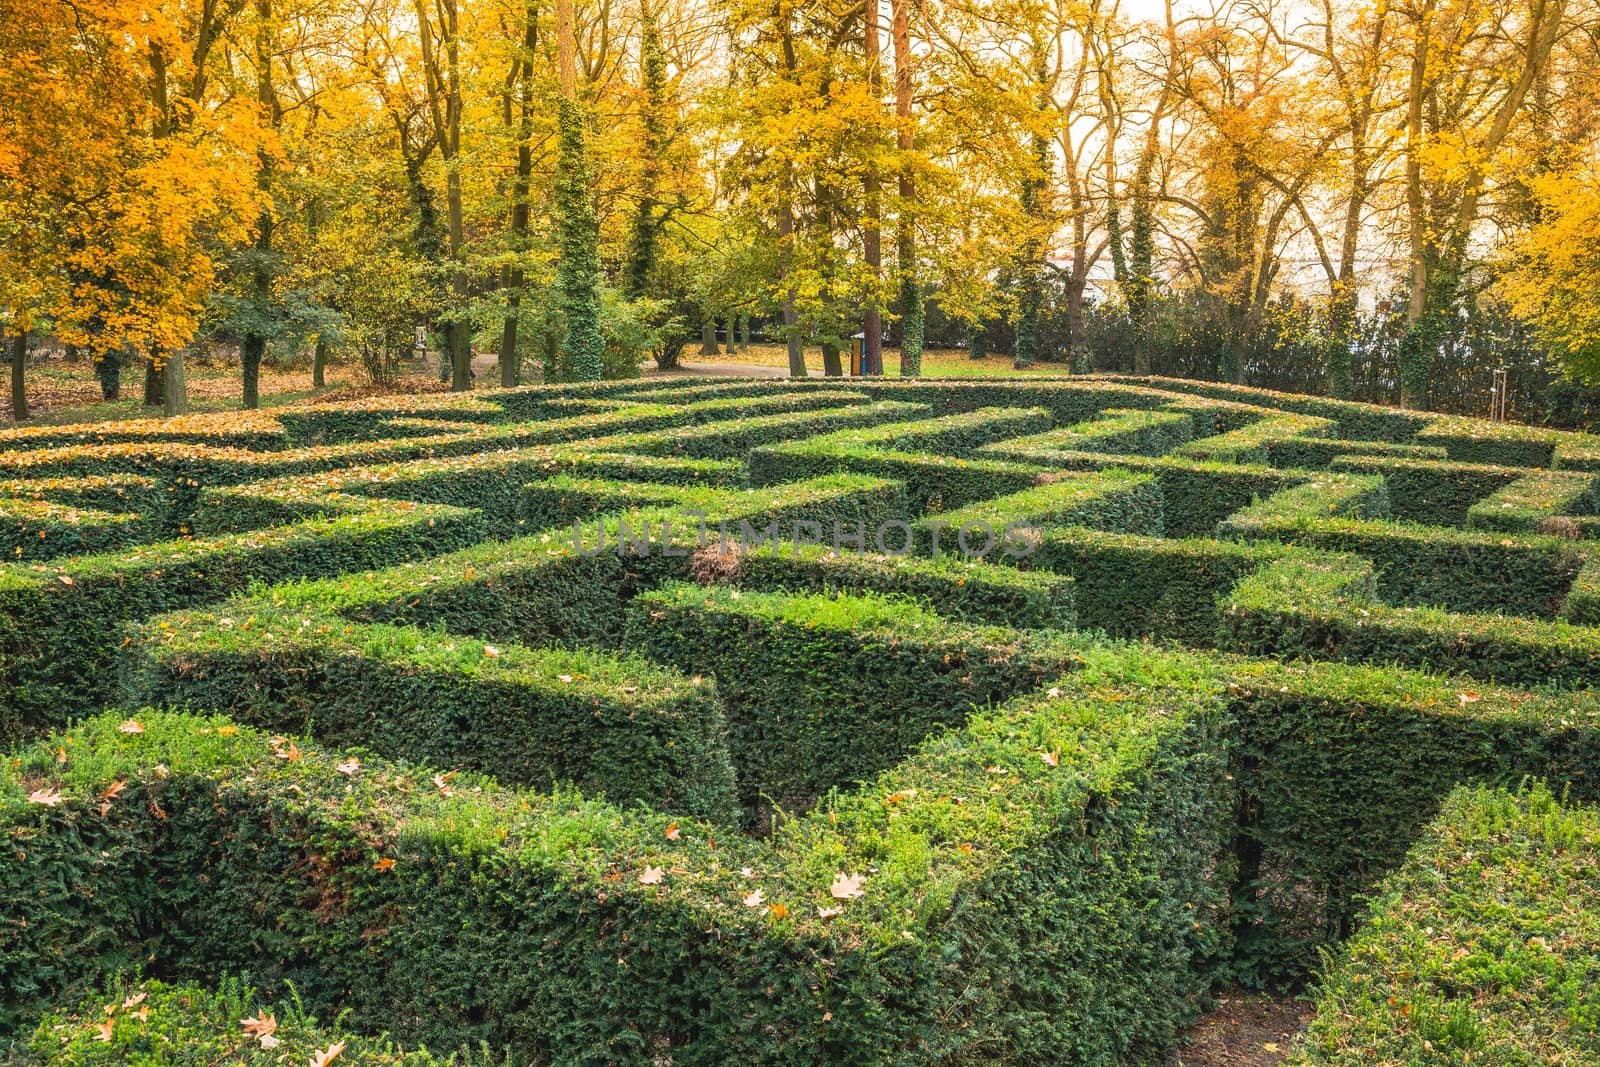 Ornamental garden with hedges of buxus sempervirens as a labyrinth